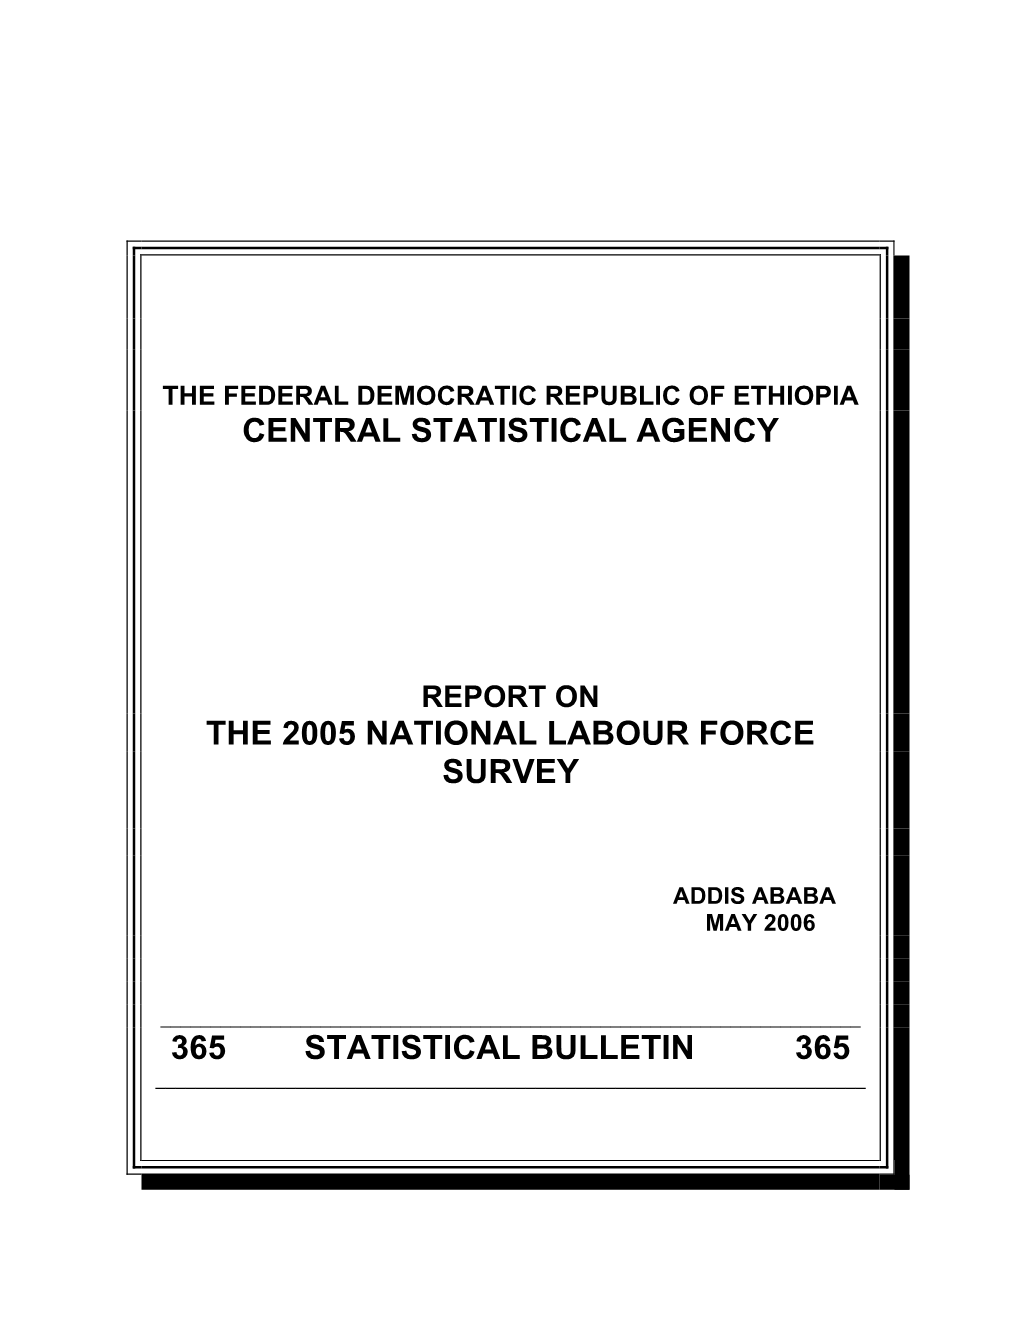 The Federal Democratic Republic of Ethiopia Central Statistical Agency